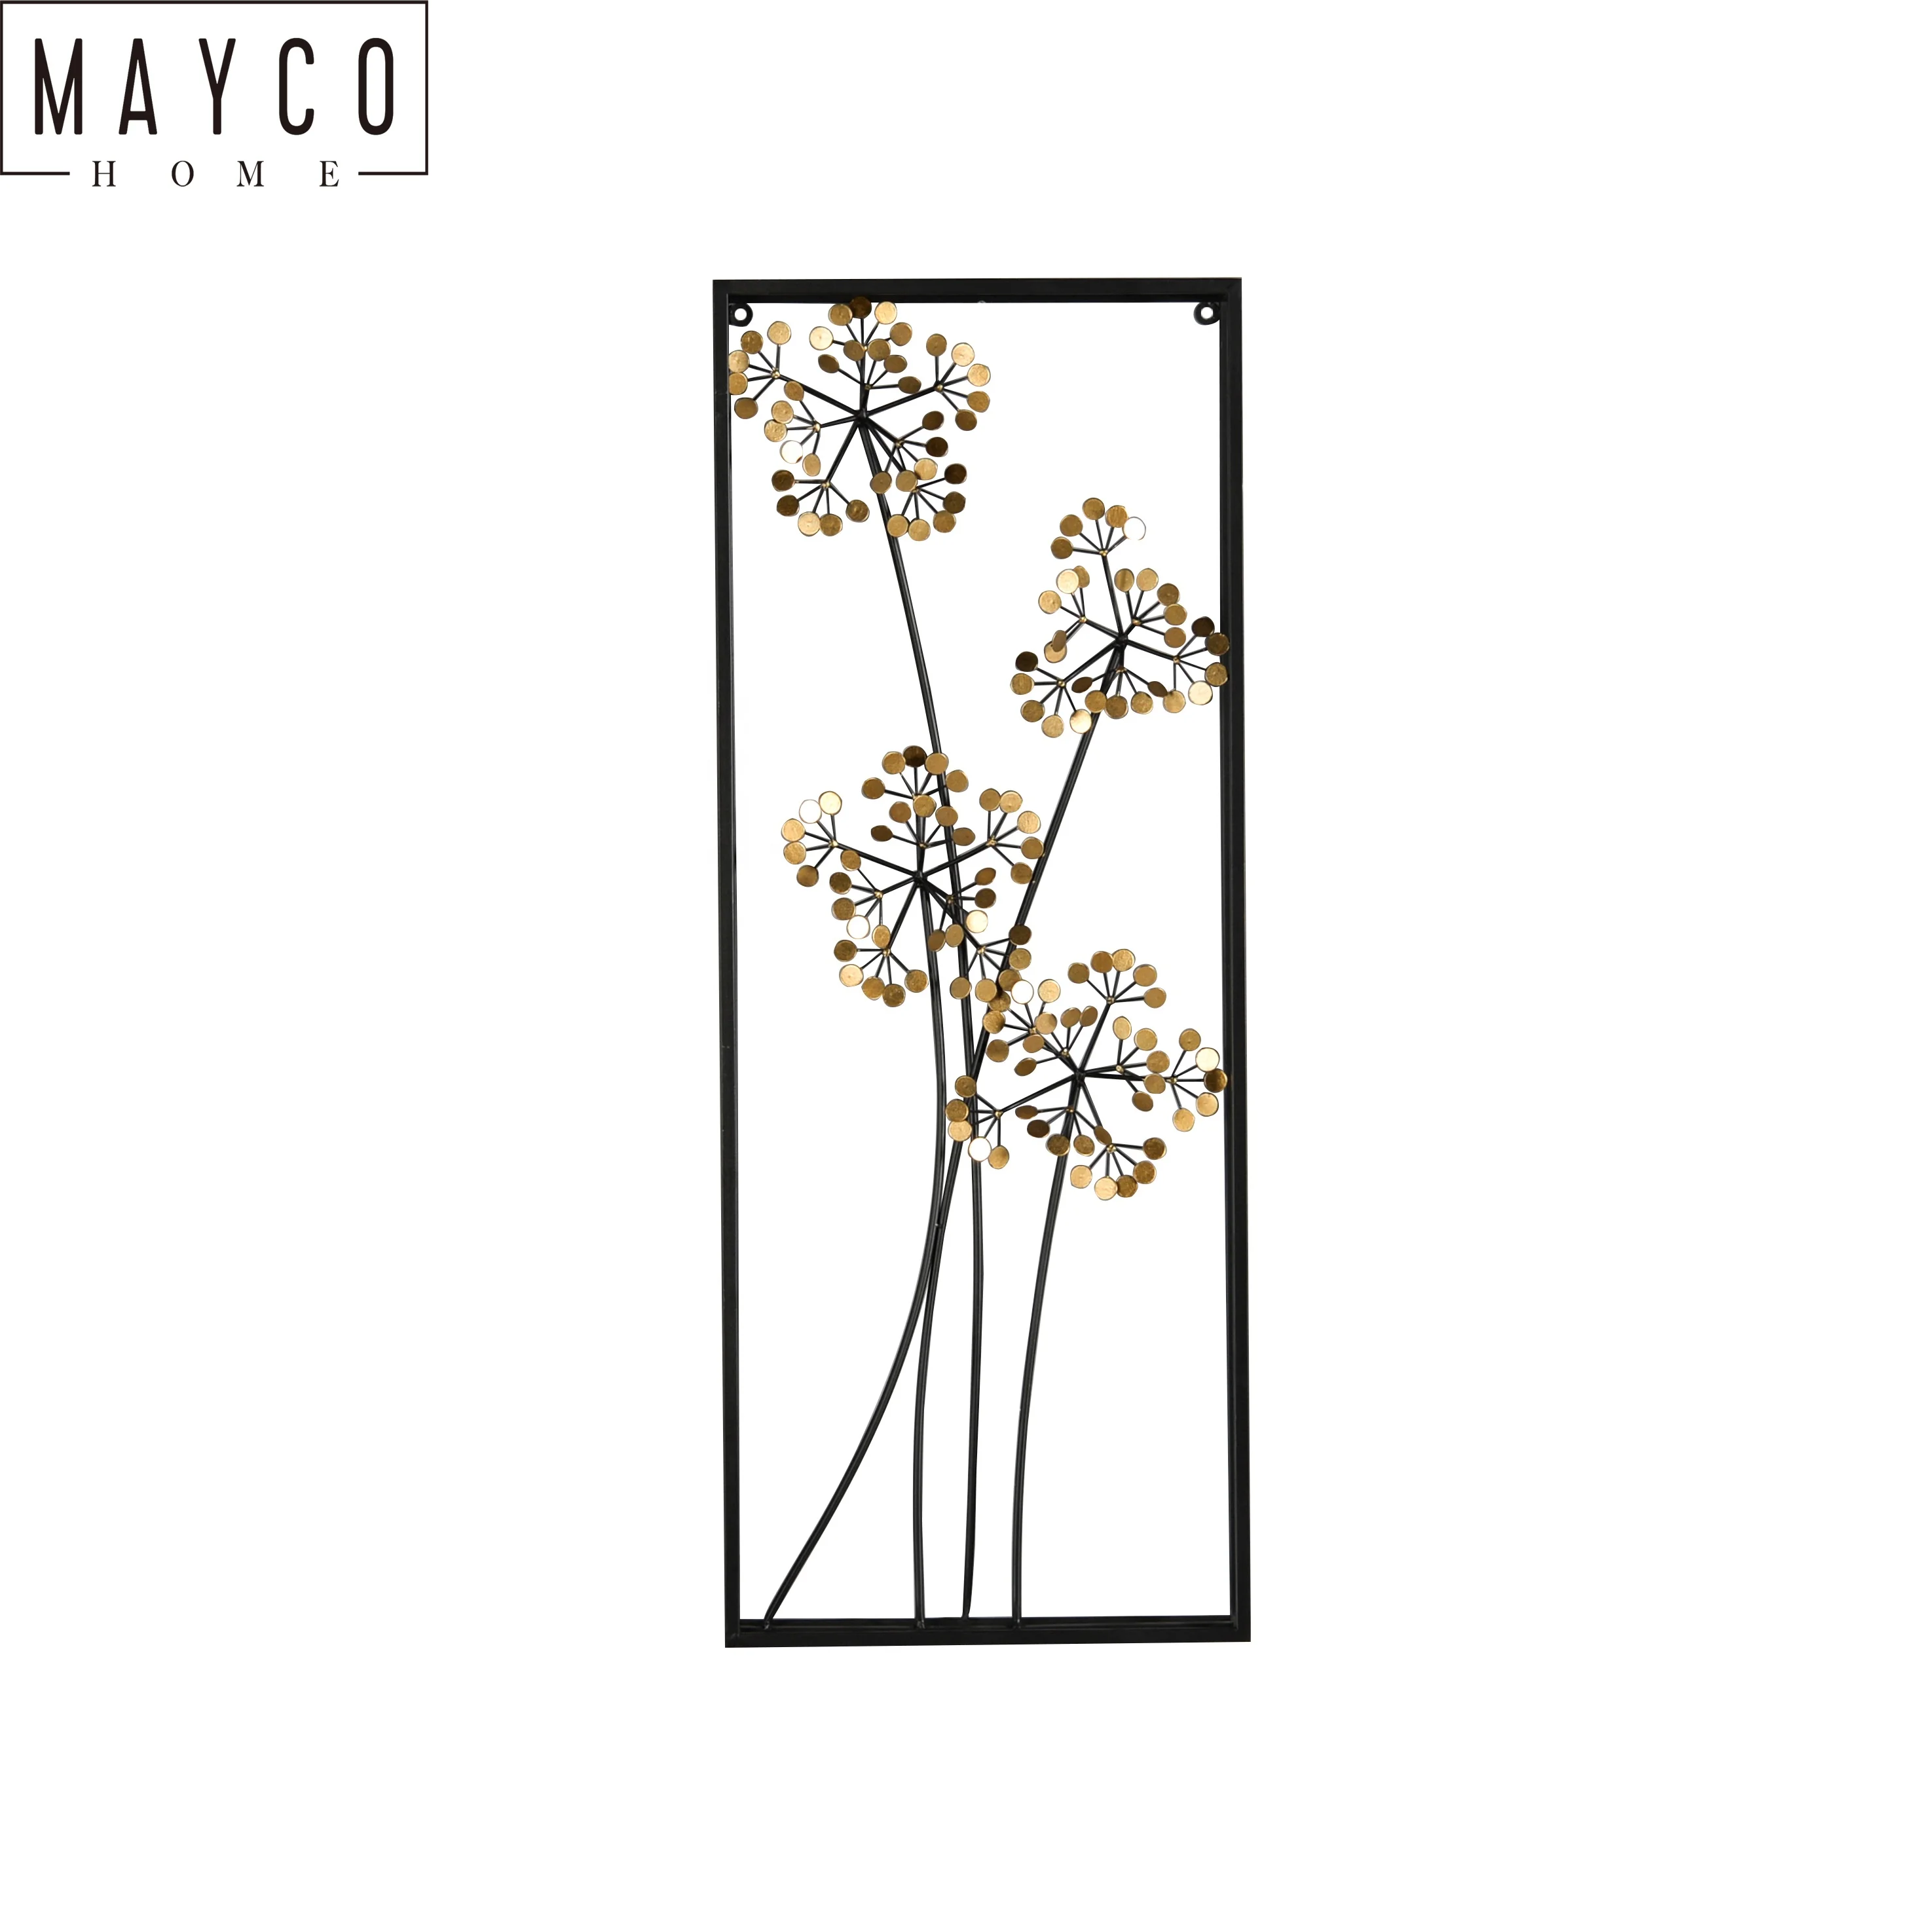 
Mayco Living Room Metal Abstract Art Wall Decoration Hand Crafted Home Decor 